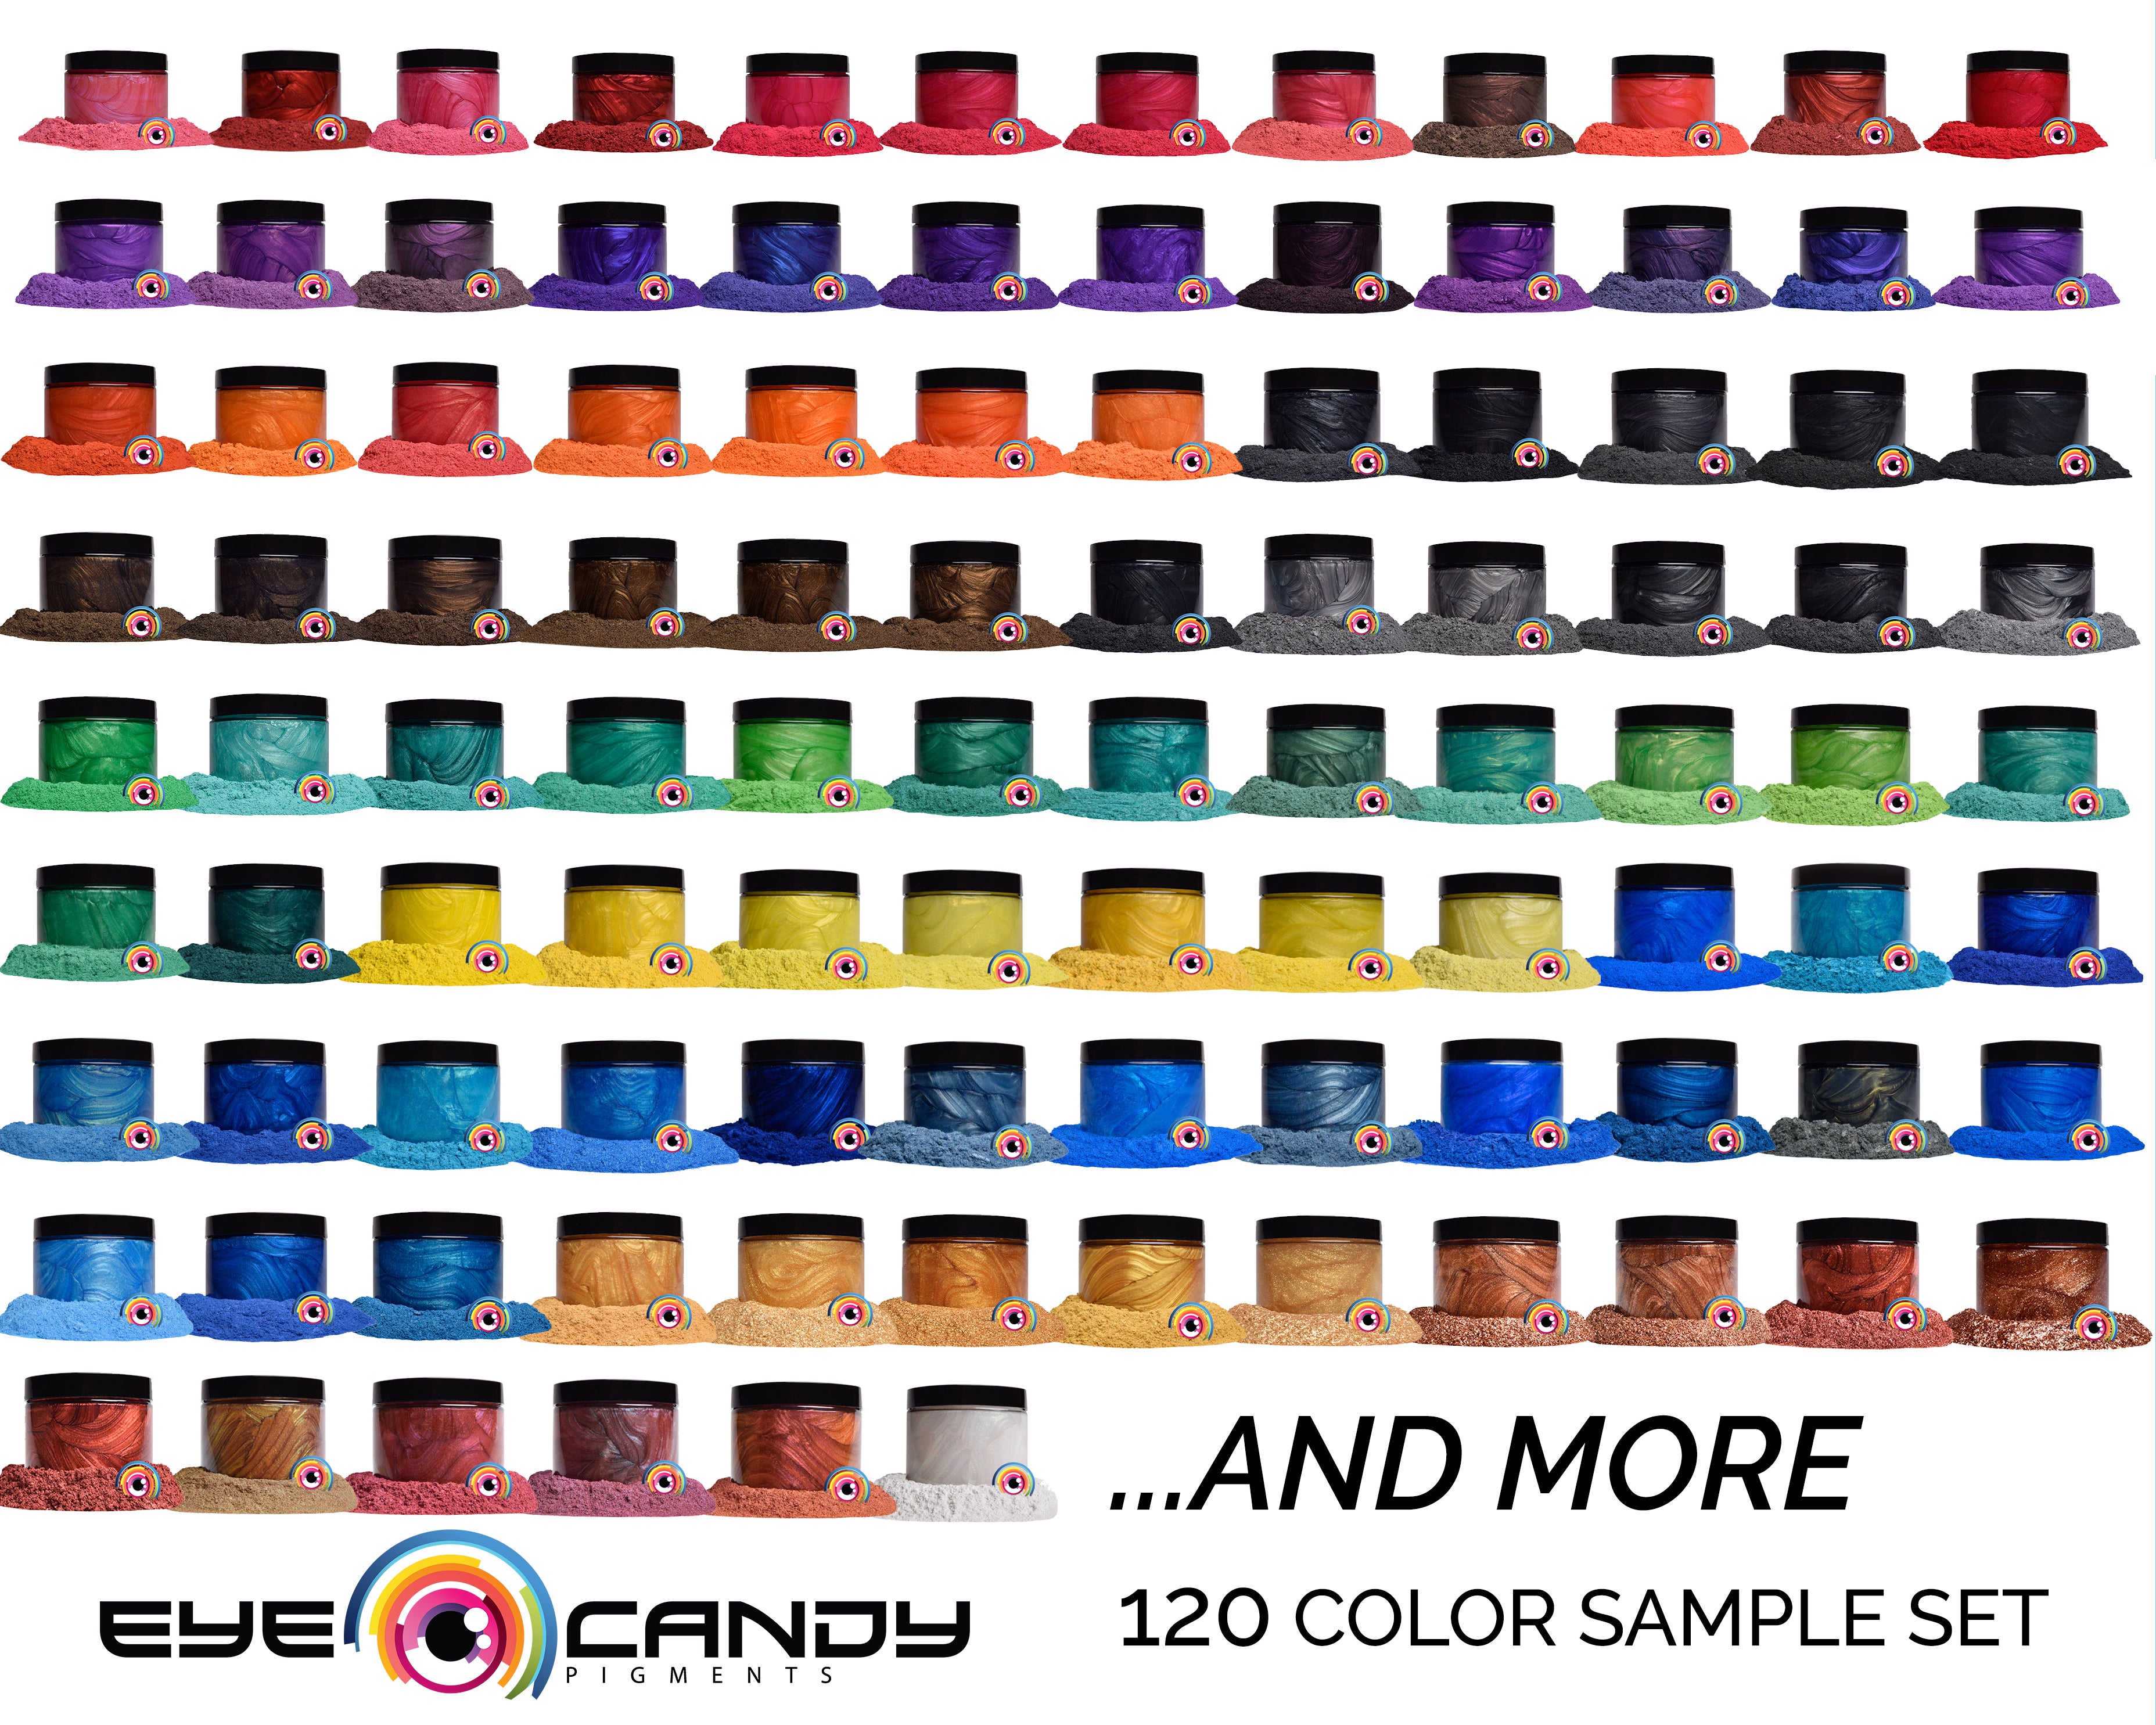 182 Color Matching TLP Pigments with Eye Candy Pigments 